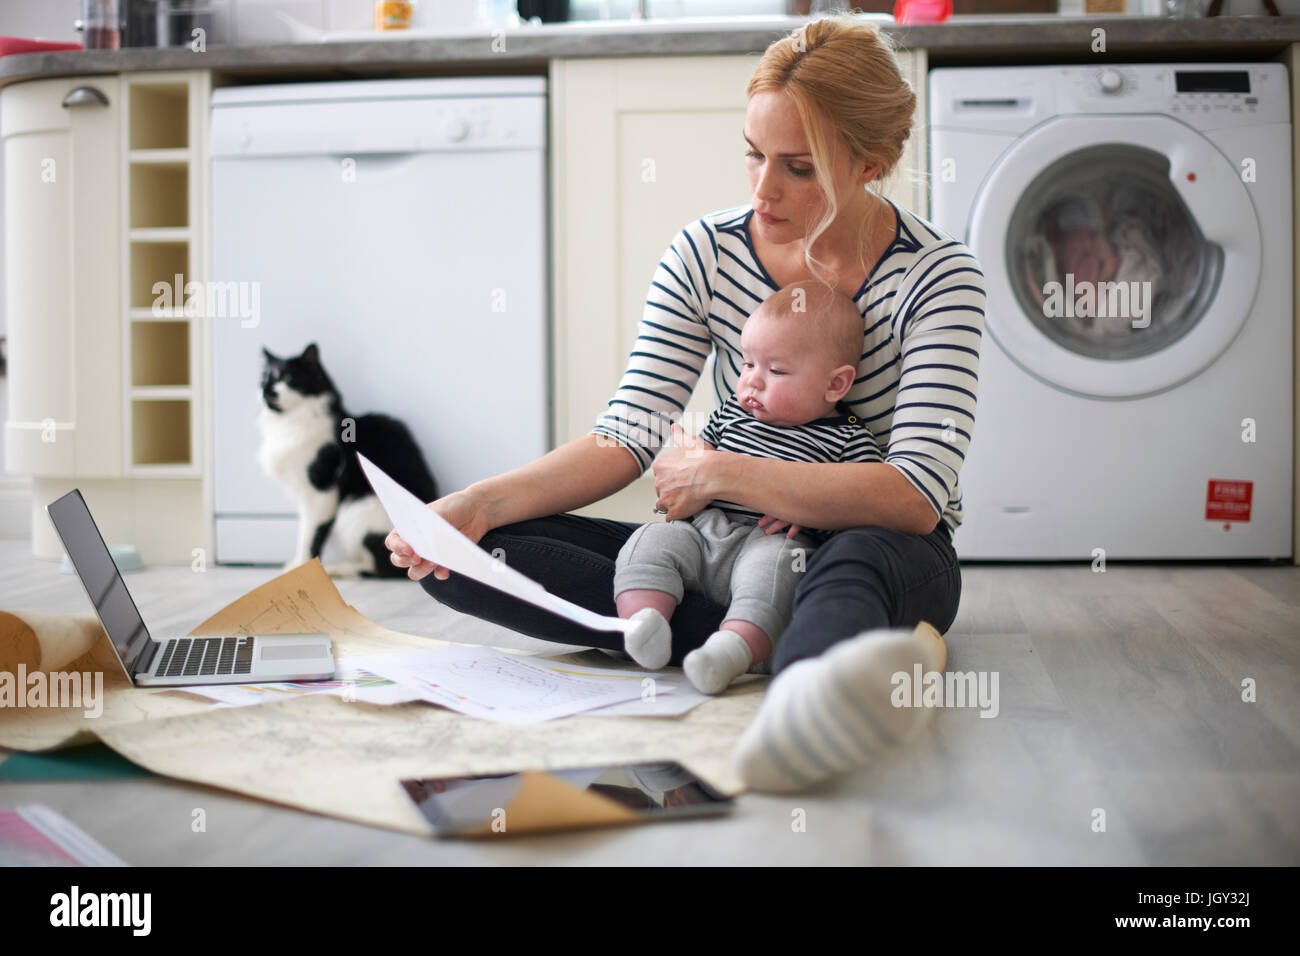 Woman holding baby son in arms, looking through work on kitchen floor, laptop and digital tablet in front of her Stock Photo